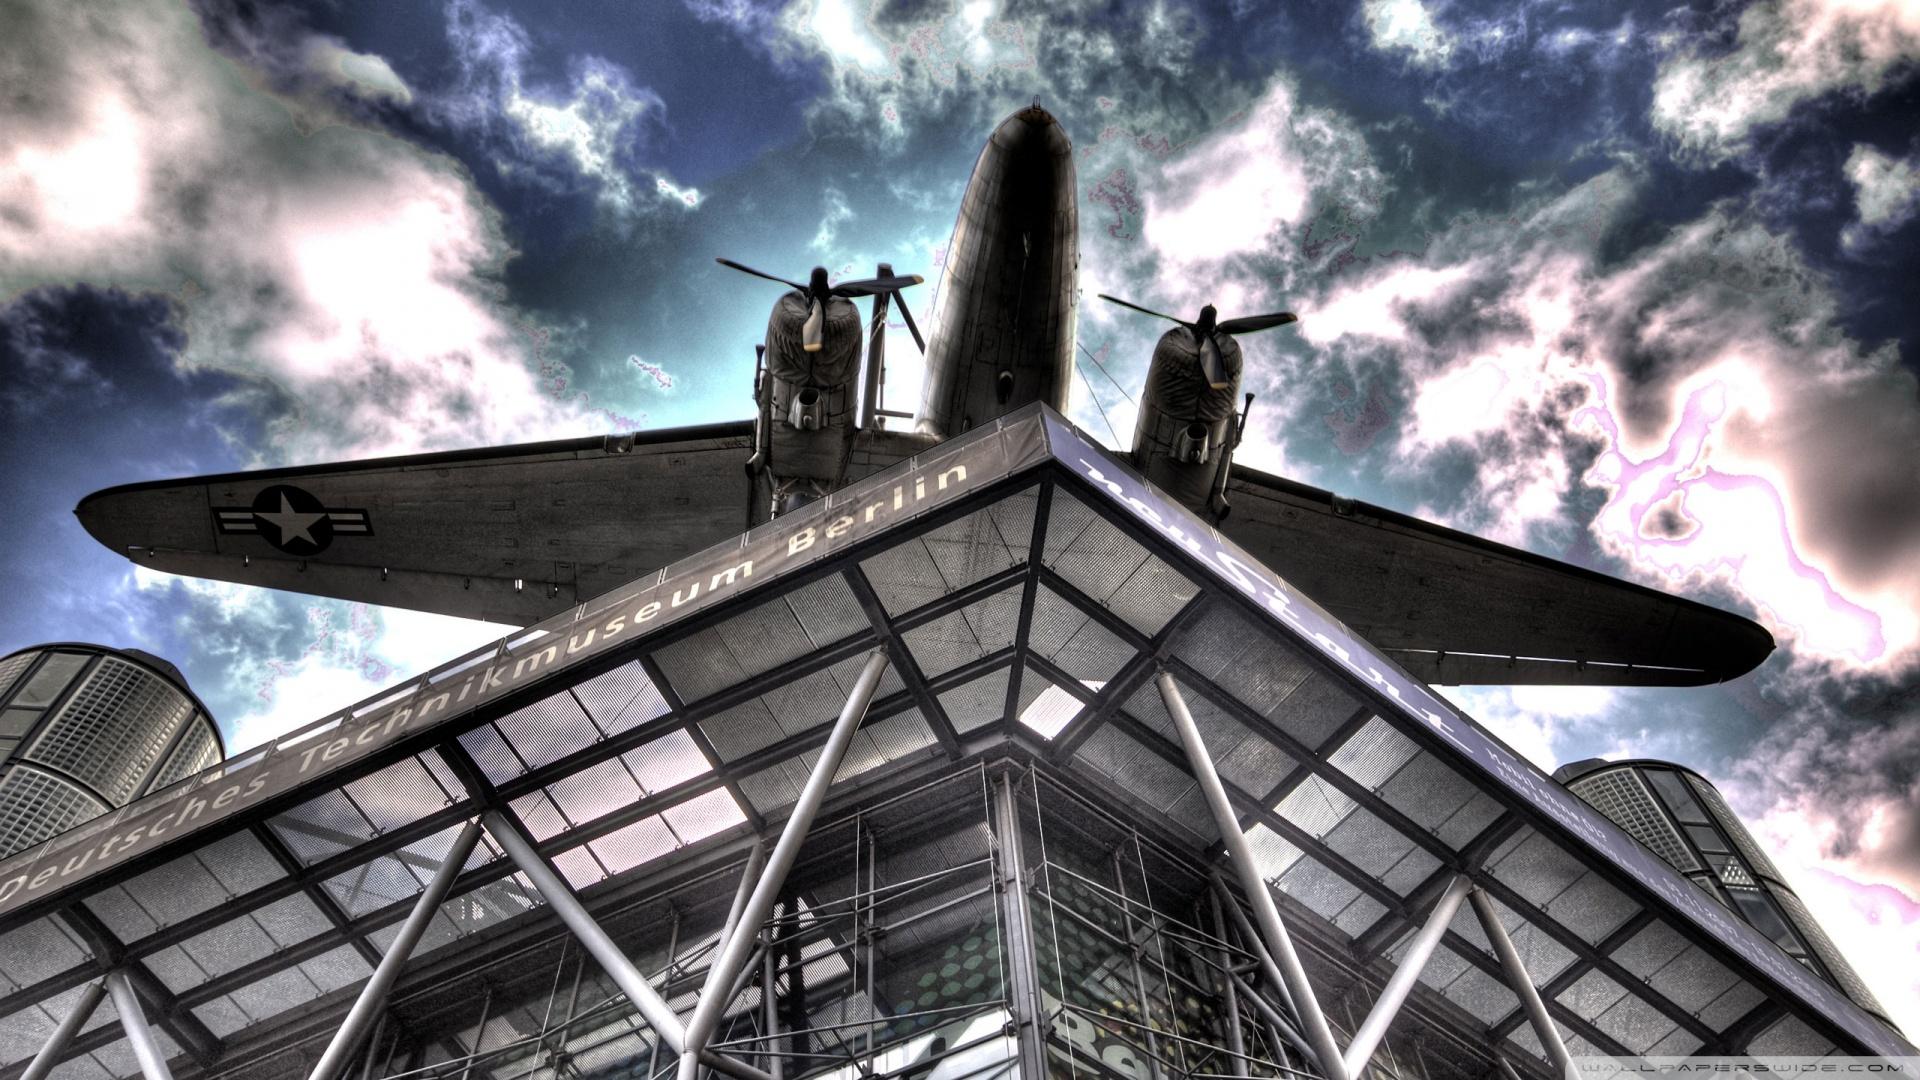 Dc3 On Technical Museum In Berlin Hdr >> HD Wallpaper, get it now!